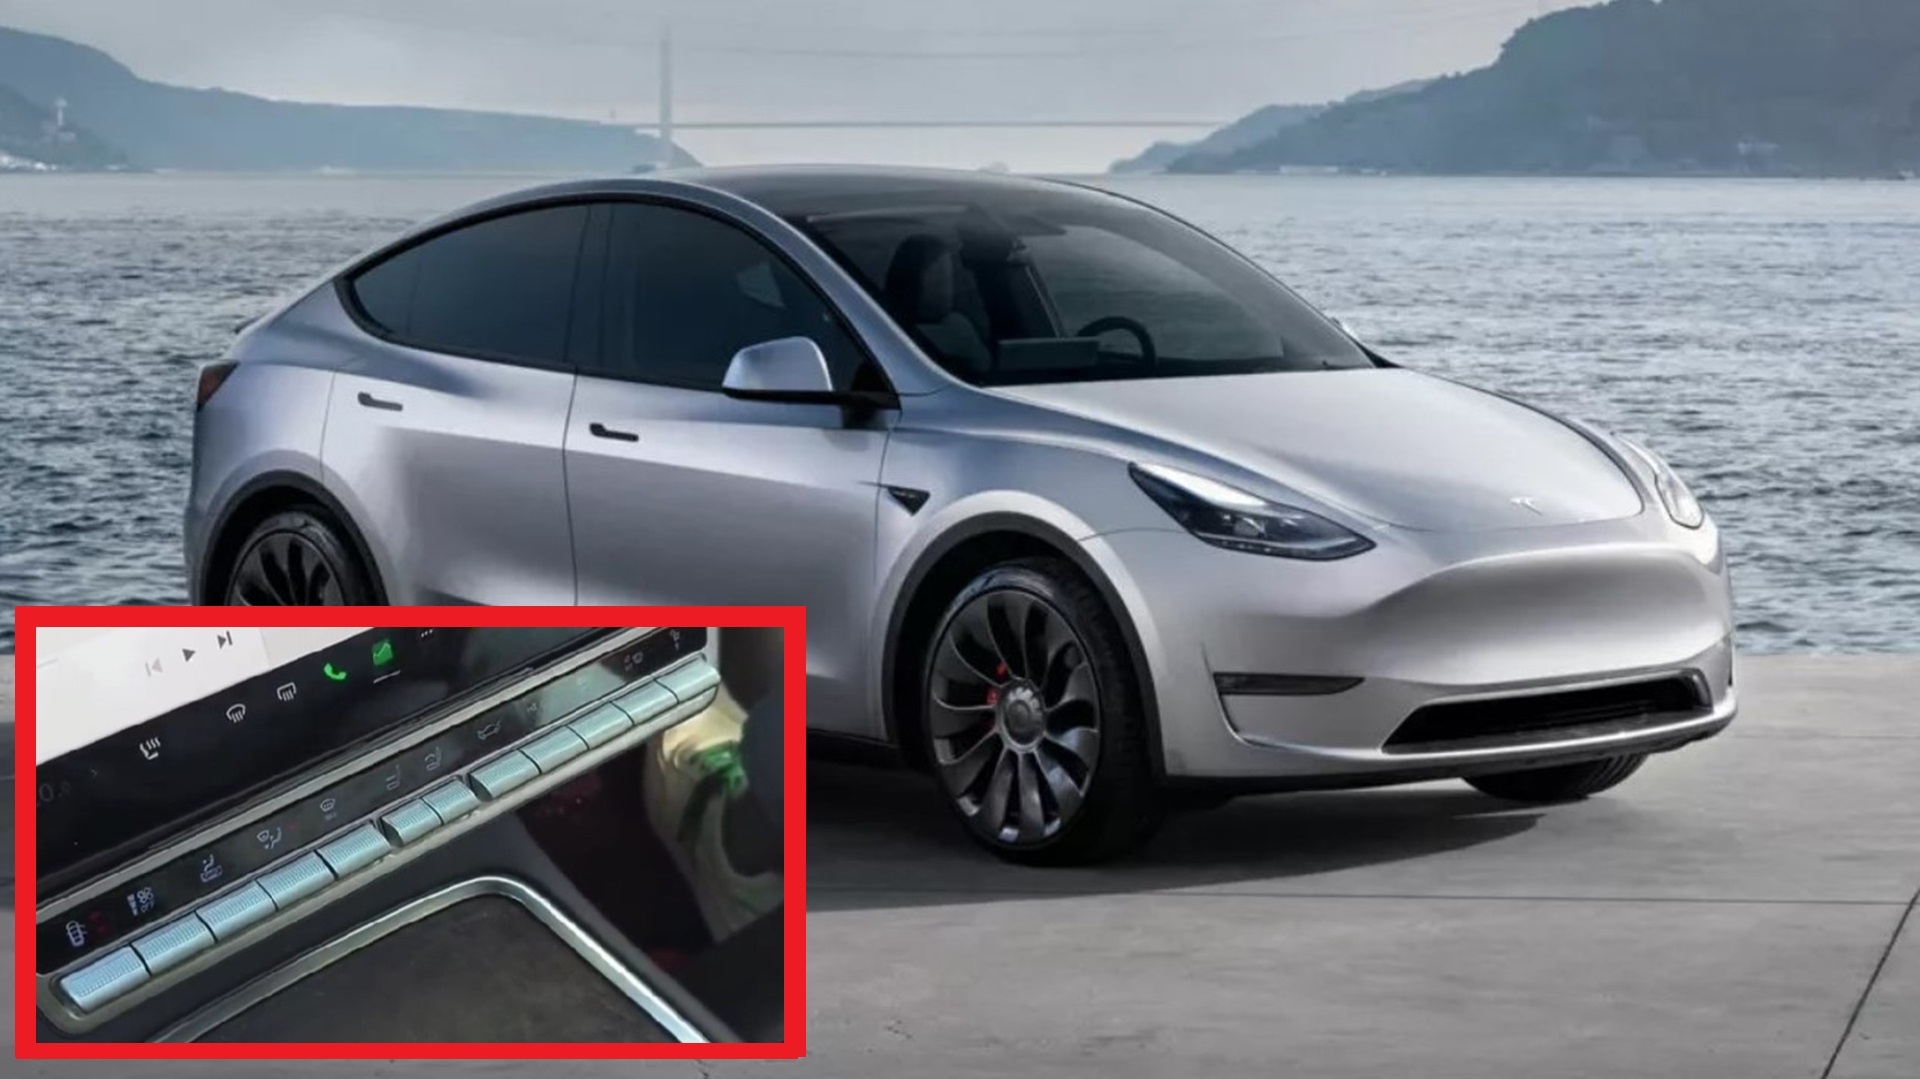 But why would you add buttons to your tesla” 😂😂 #tesla #modely